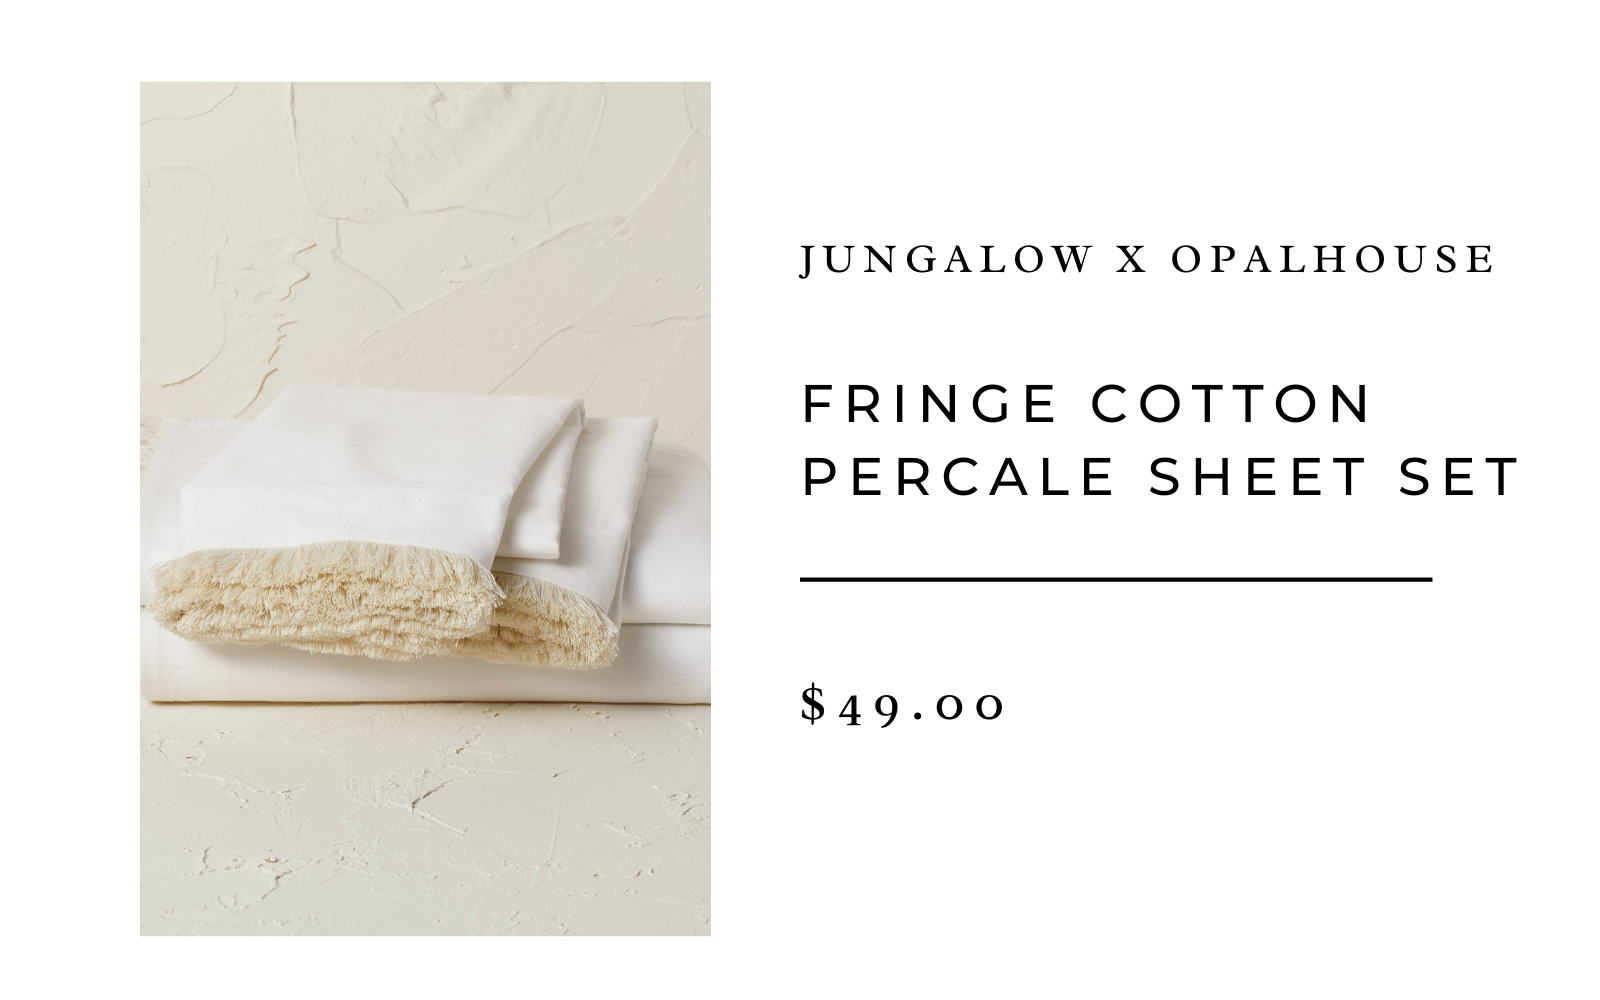 Our Opalhouse Designed with Jungalow Fall collection is here